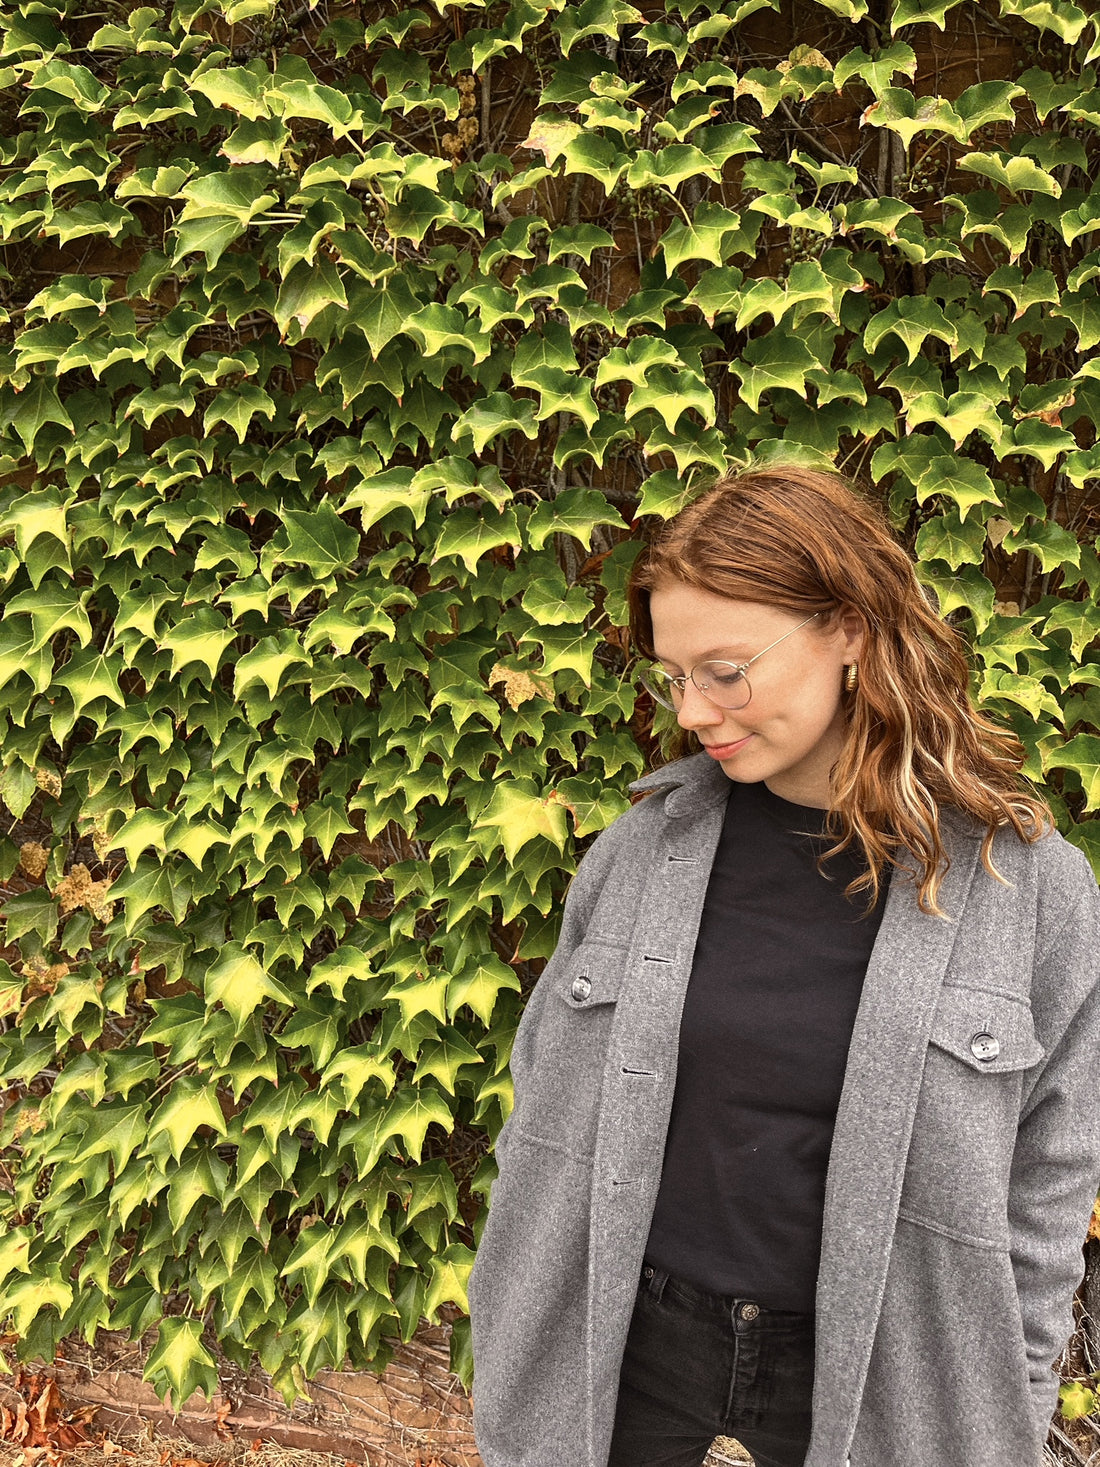 The Shay Shacket/Jacket in "Grey" is featured in this image with Millie standing in front of a green wall of leaves.